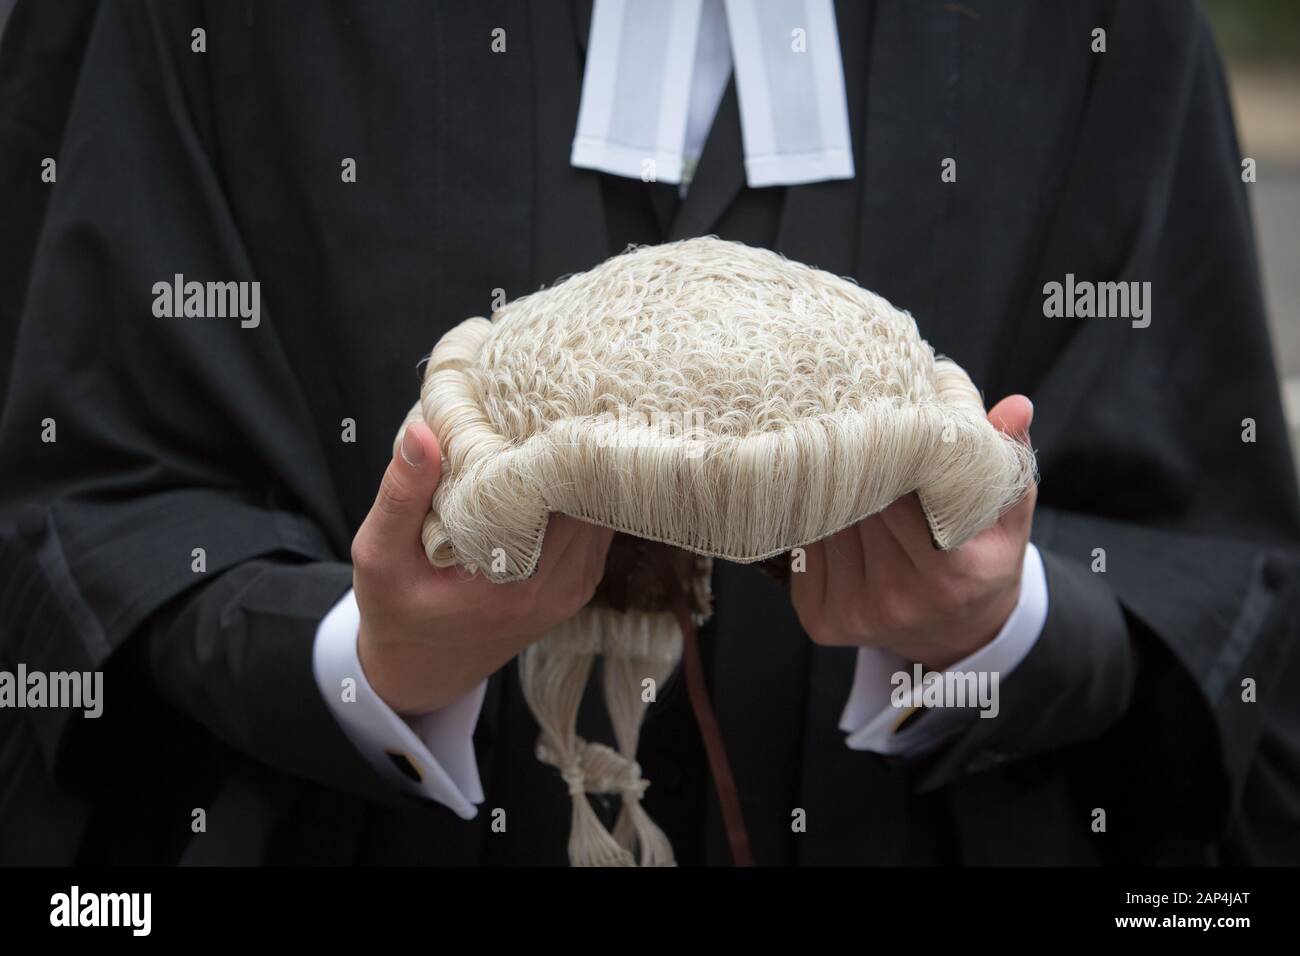 A man wearing a legal outfit holding a court wig, otherwiseknownas a peruke Stock Photo